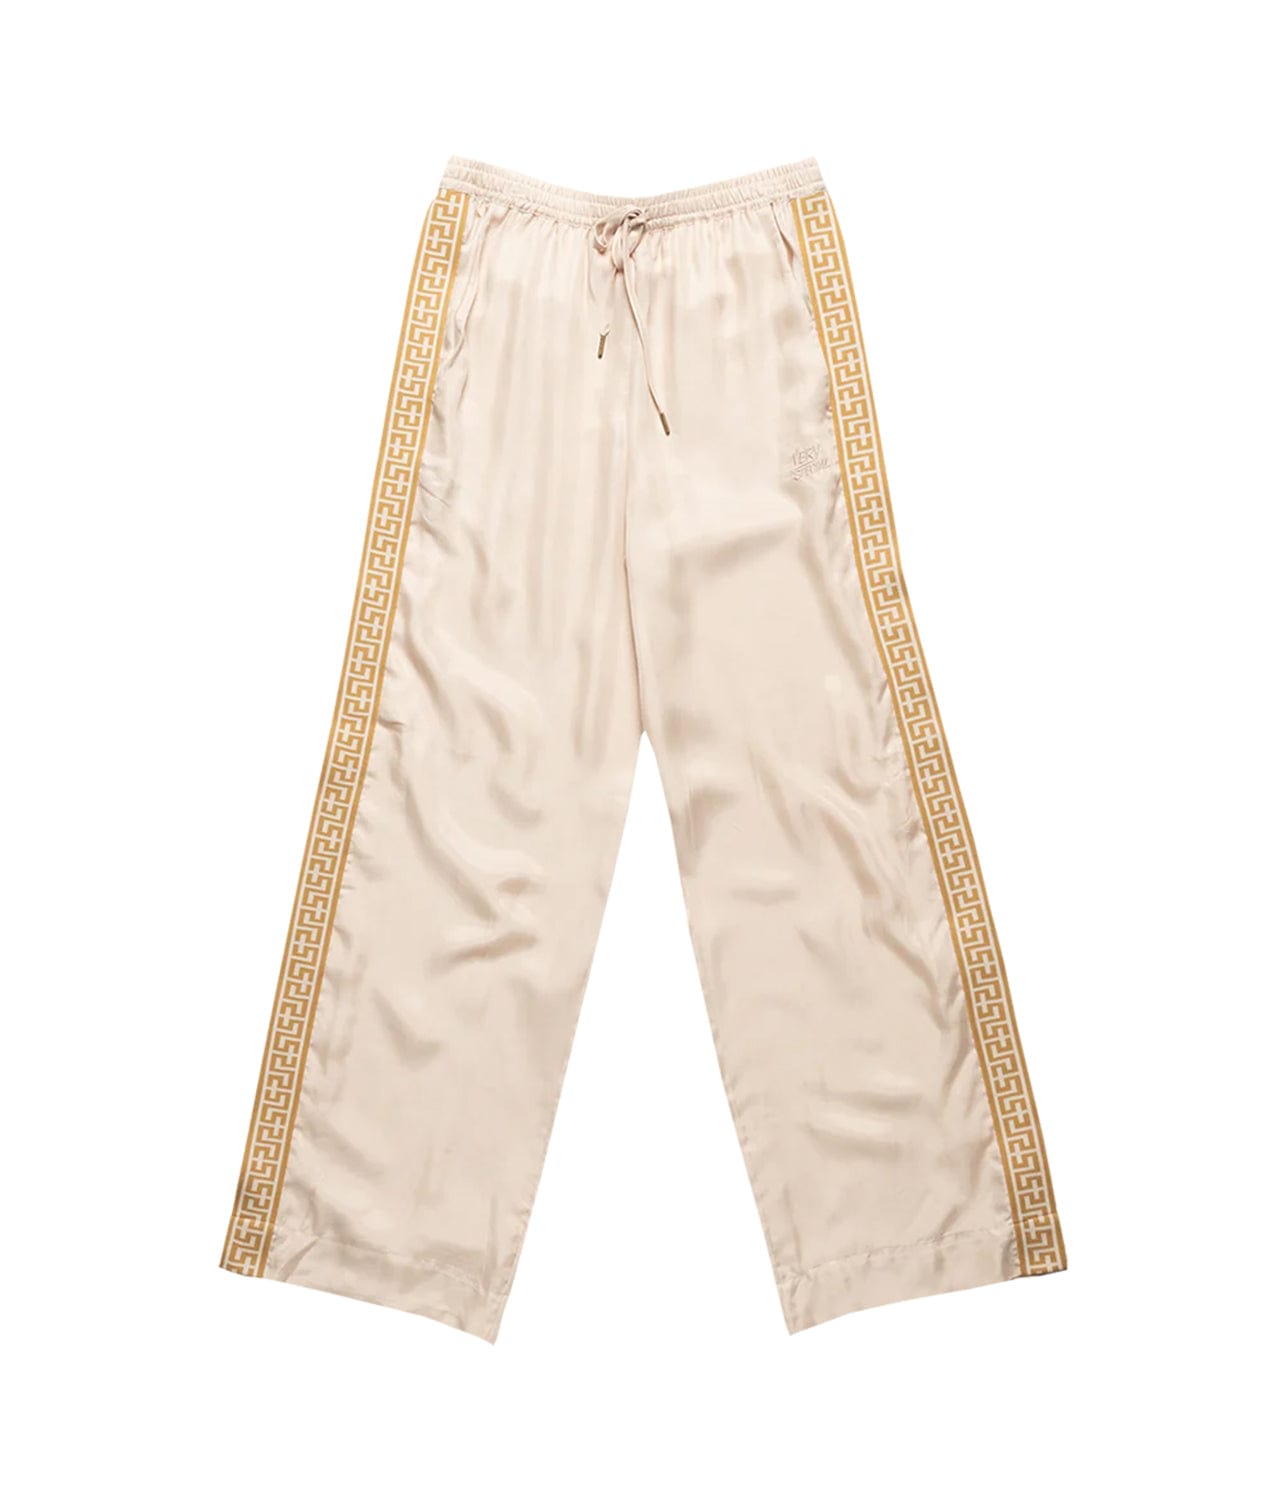 GEO VACAY PANTS- BIRCH | SOMETHING VERY SPECIAL |  SOMETHING VERY SPECIAL GEO VACAY PANTS- BIRCH